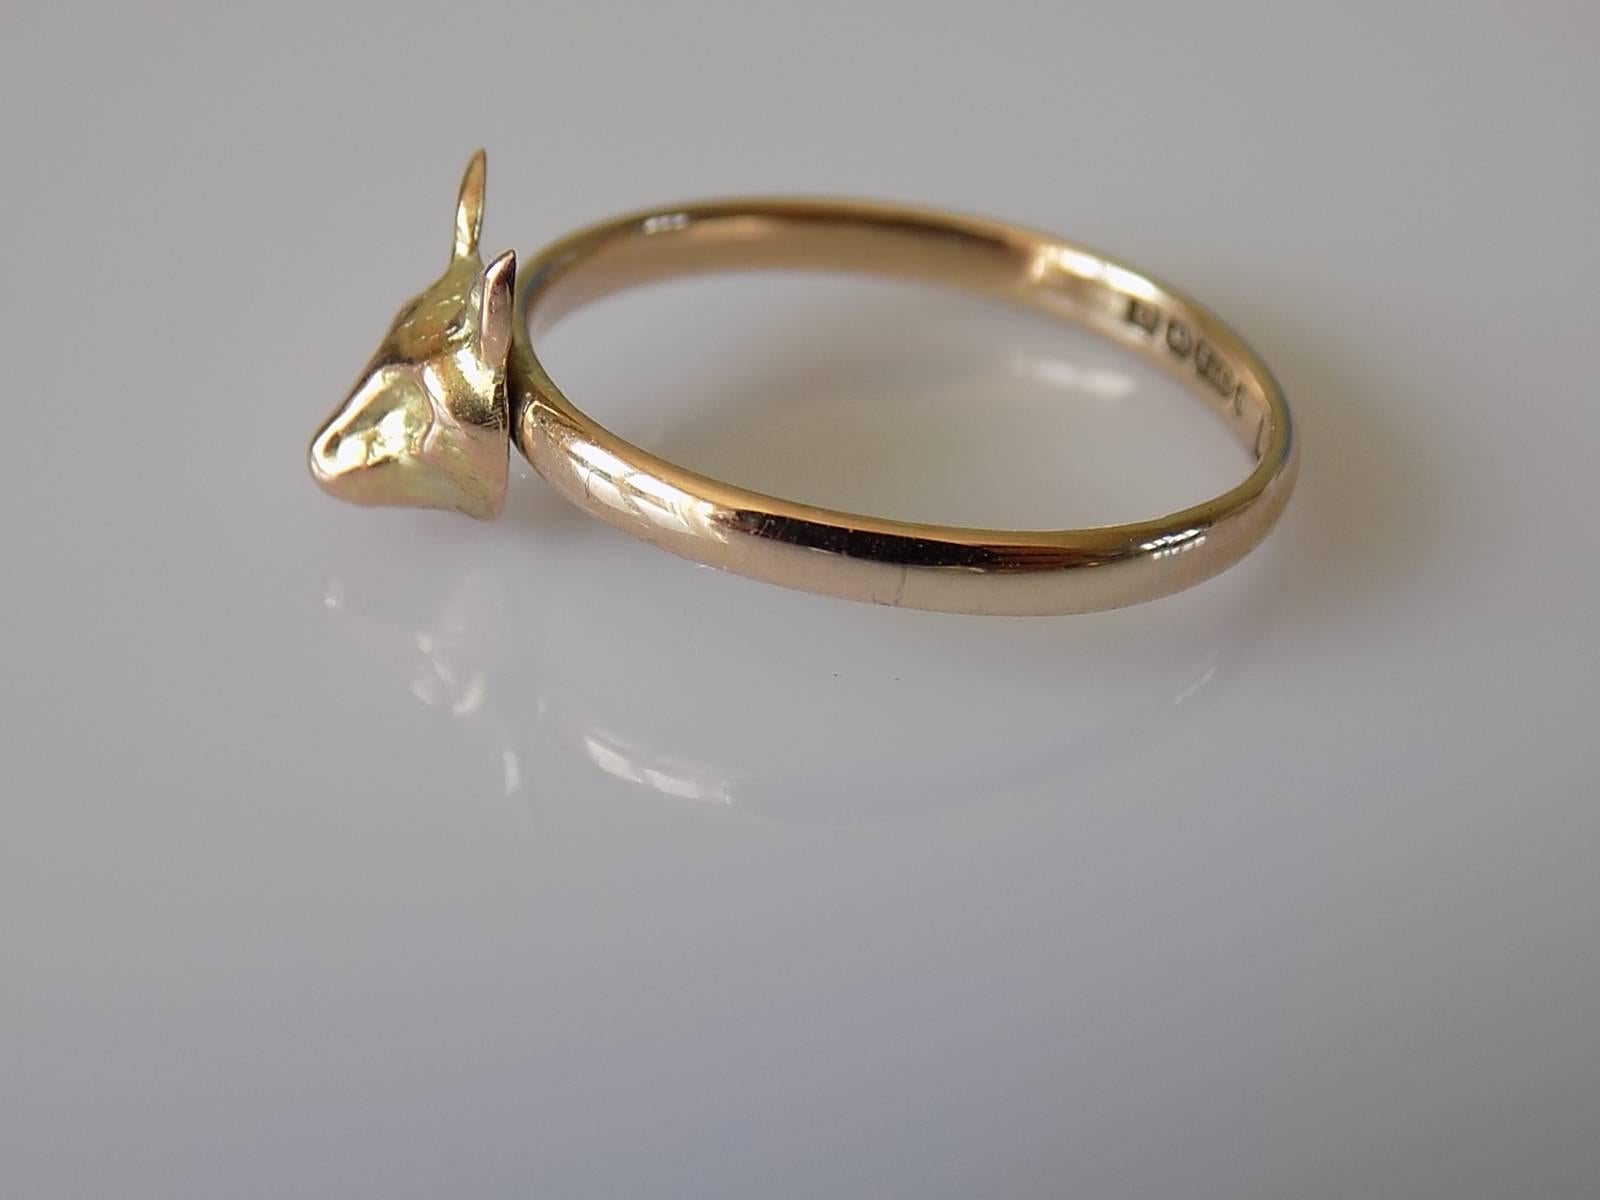 A Victorian Gold Fox head stick pin conversion ring on 9 Carat Gold shank. 
Size Q 1/2 UK, 8.75 US.
Height of the face 9mm, Width 7mm.
Weight 1.7gr.
Shank fully hallmarked for 9 Carat Gold.
Very good condition and ready to wear.